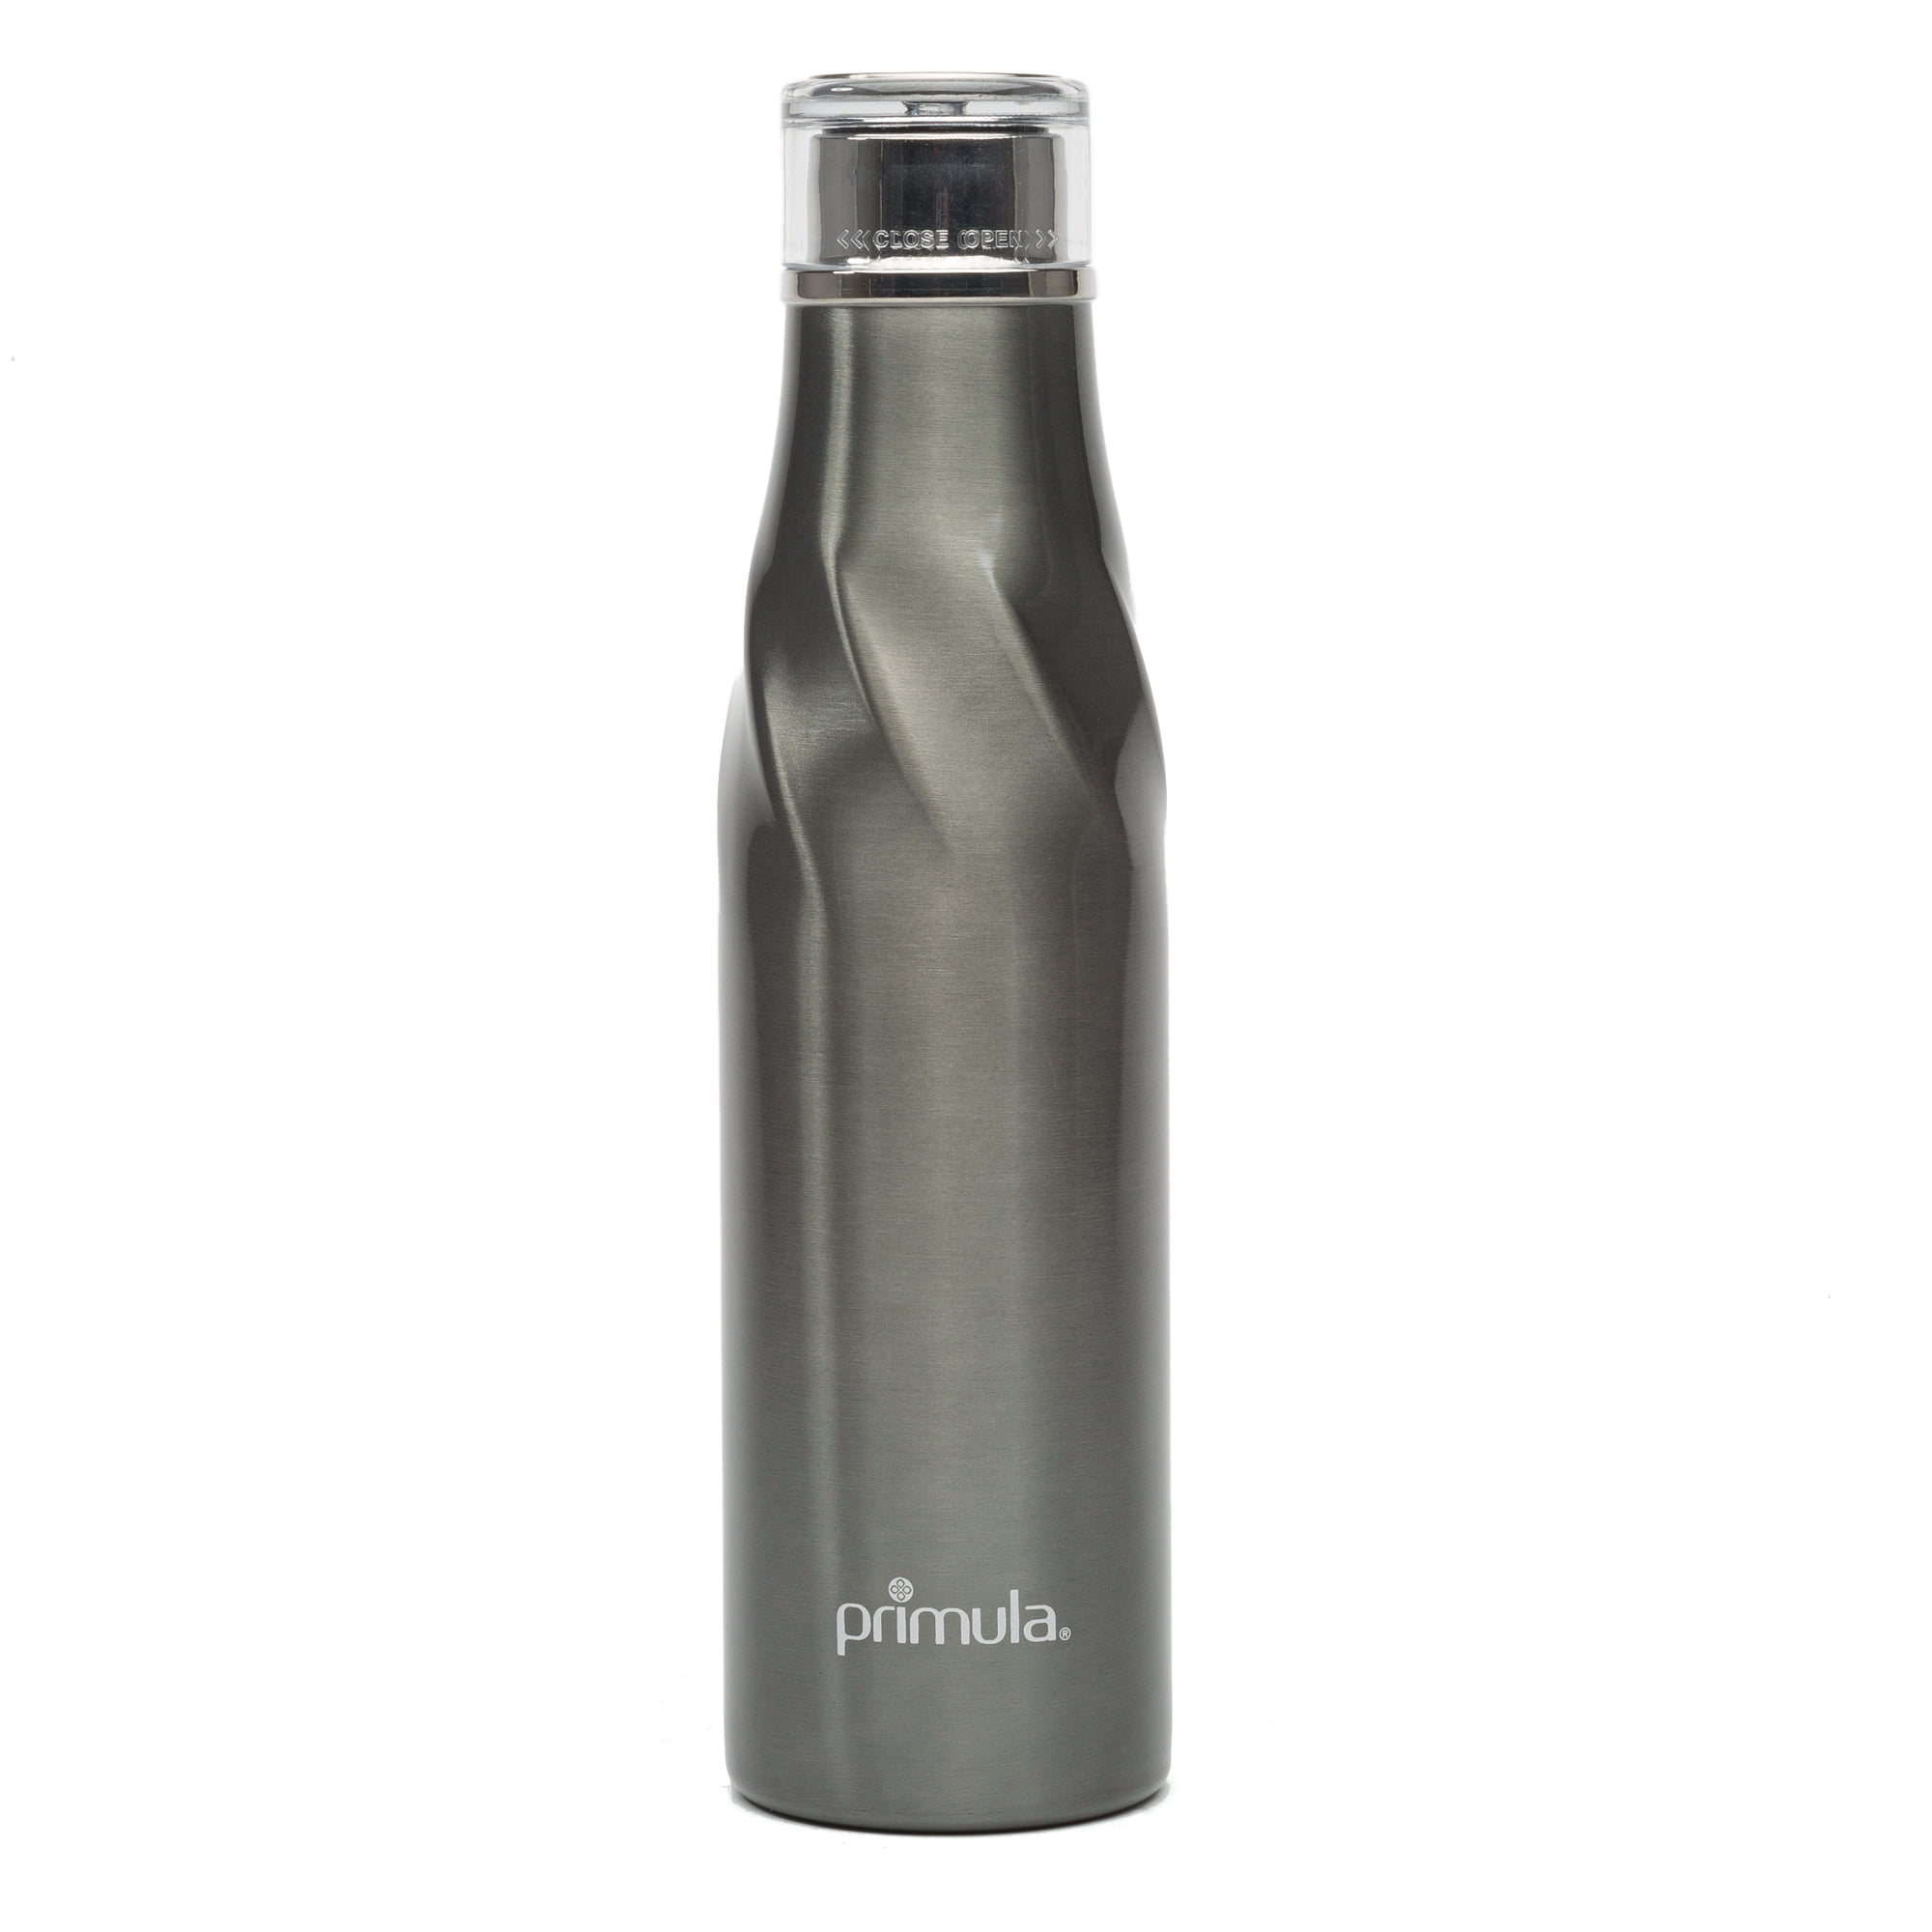 DRINCO Stainless Steel Water Bottle Vacuum Insulated 17oz 500ml Kids Metal Flask 